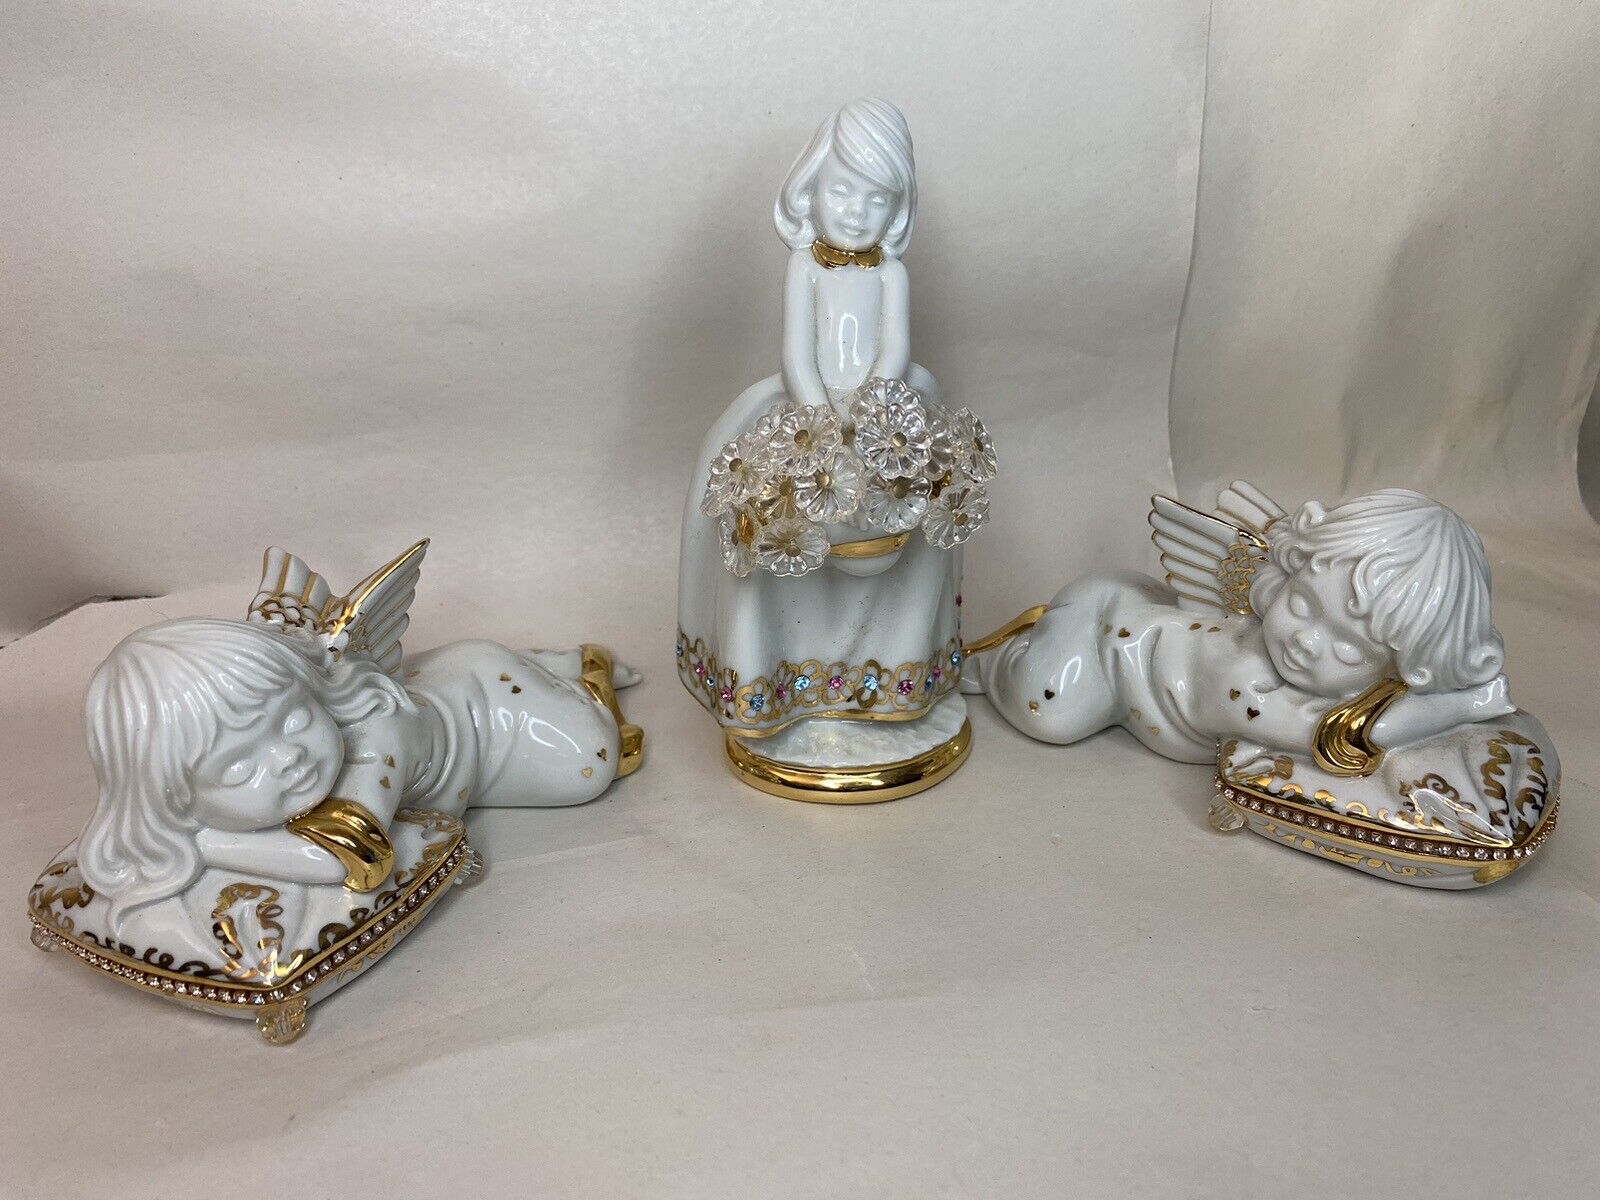 Limoges Oggetti Figurine Swavorski Crystals Made in Italy Girl Angels Set of 3